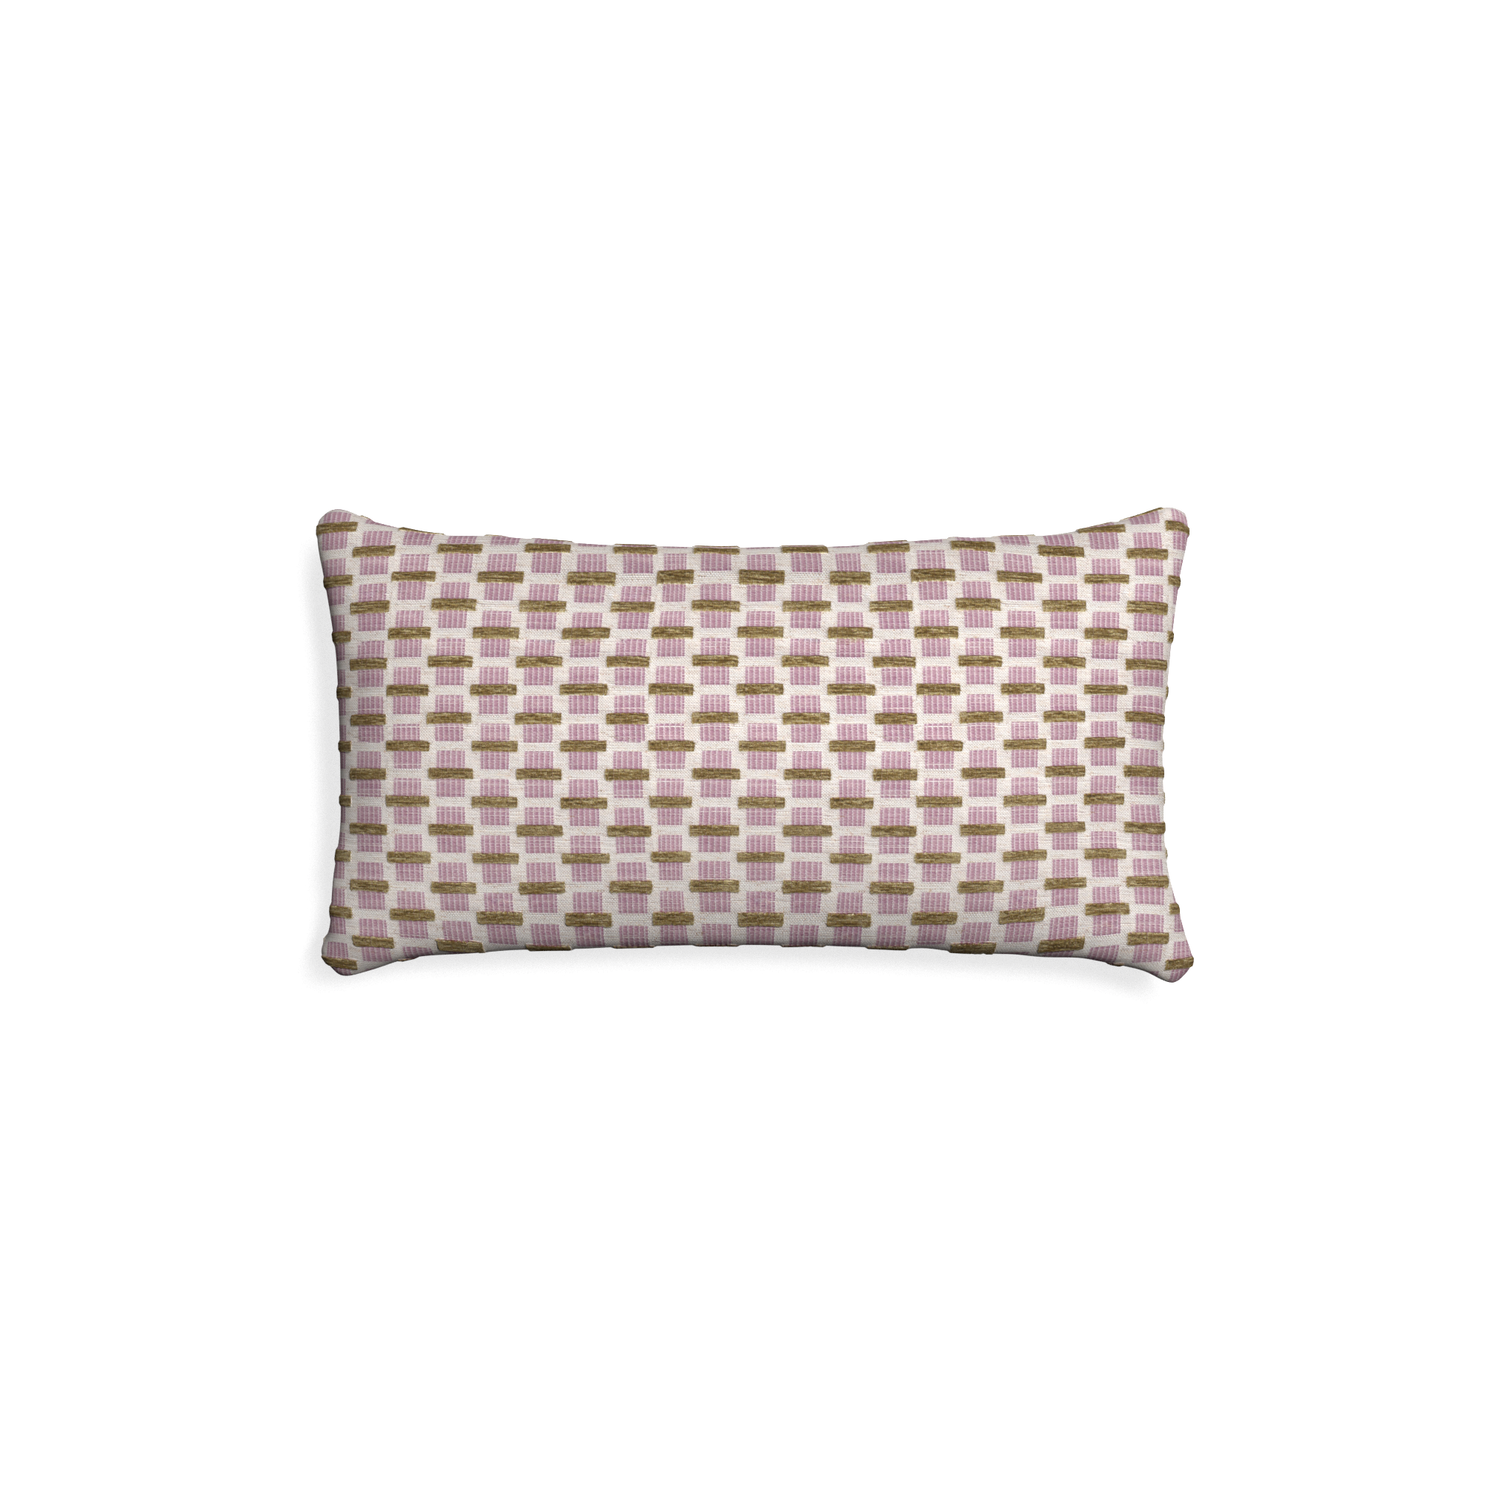 Petite-lumbar willow orchid custom pink geometric chenillepillow with none on white background